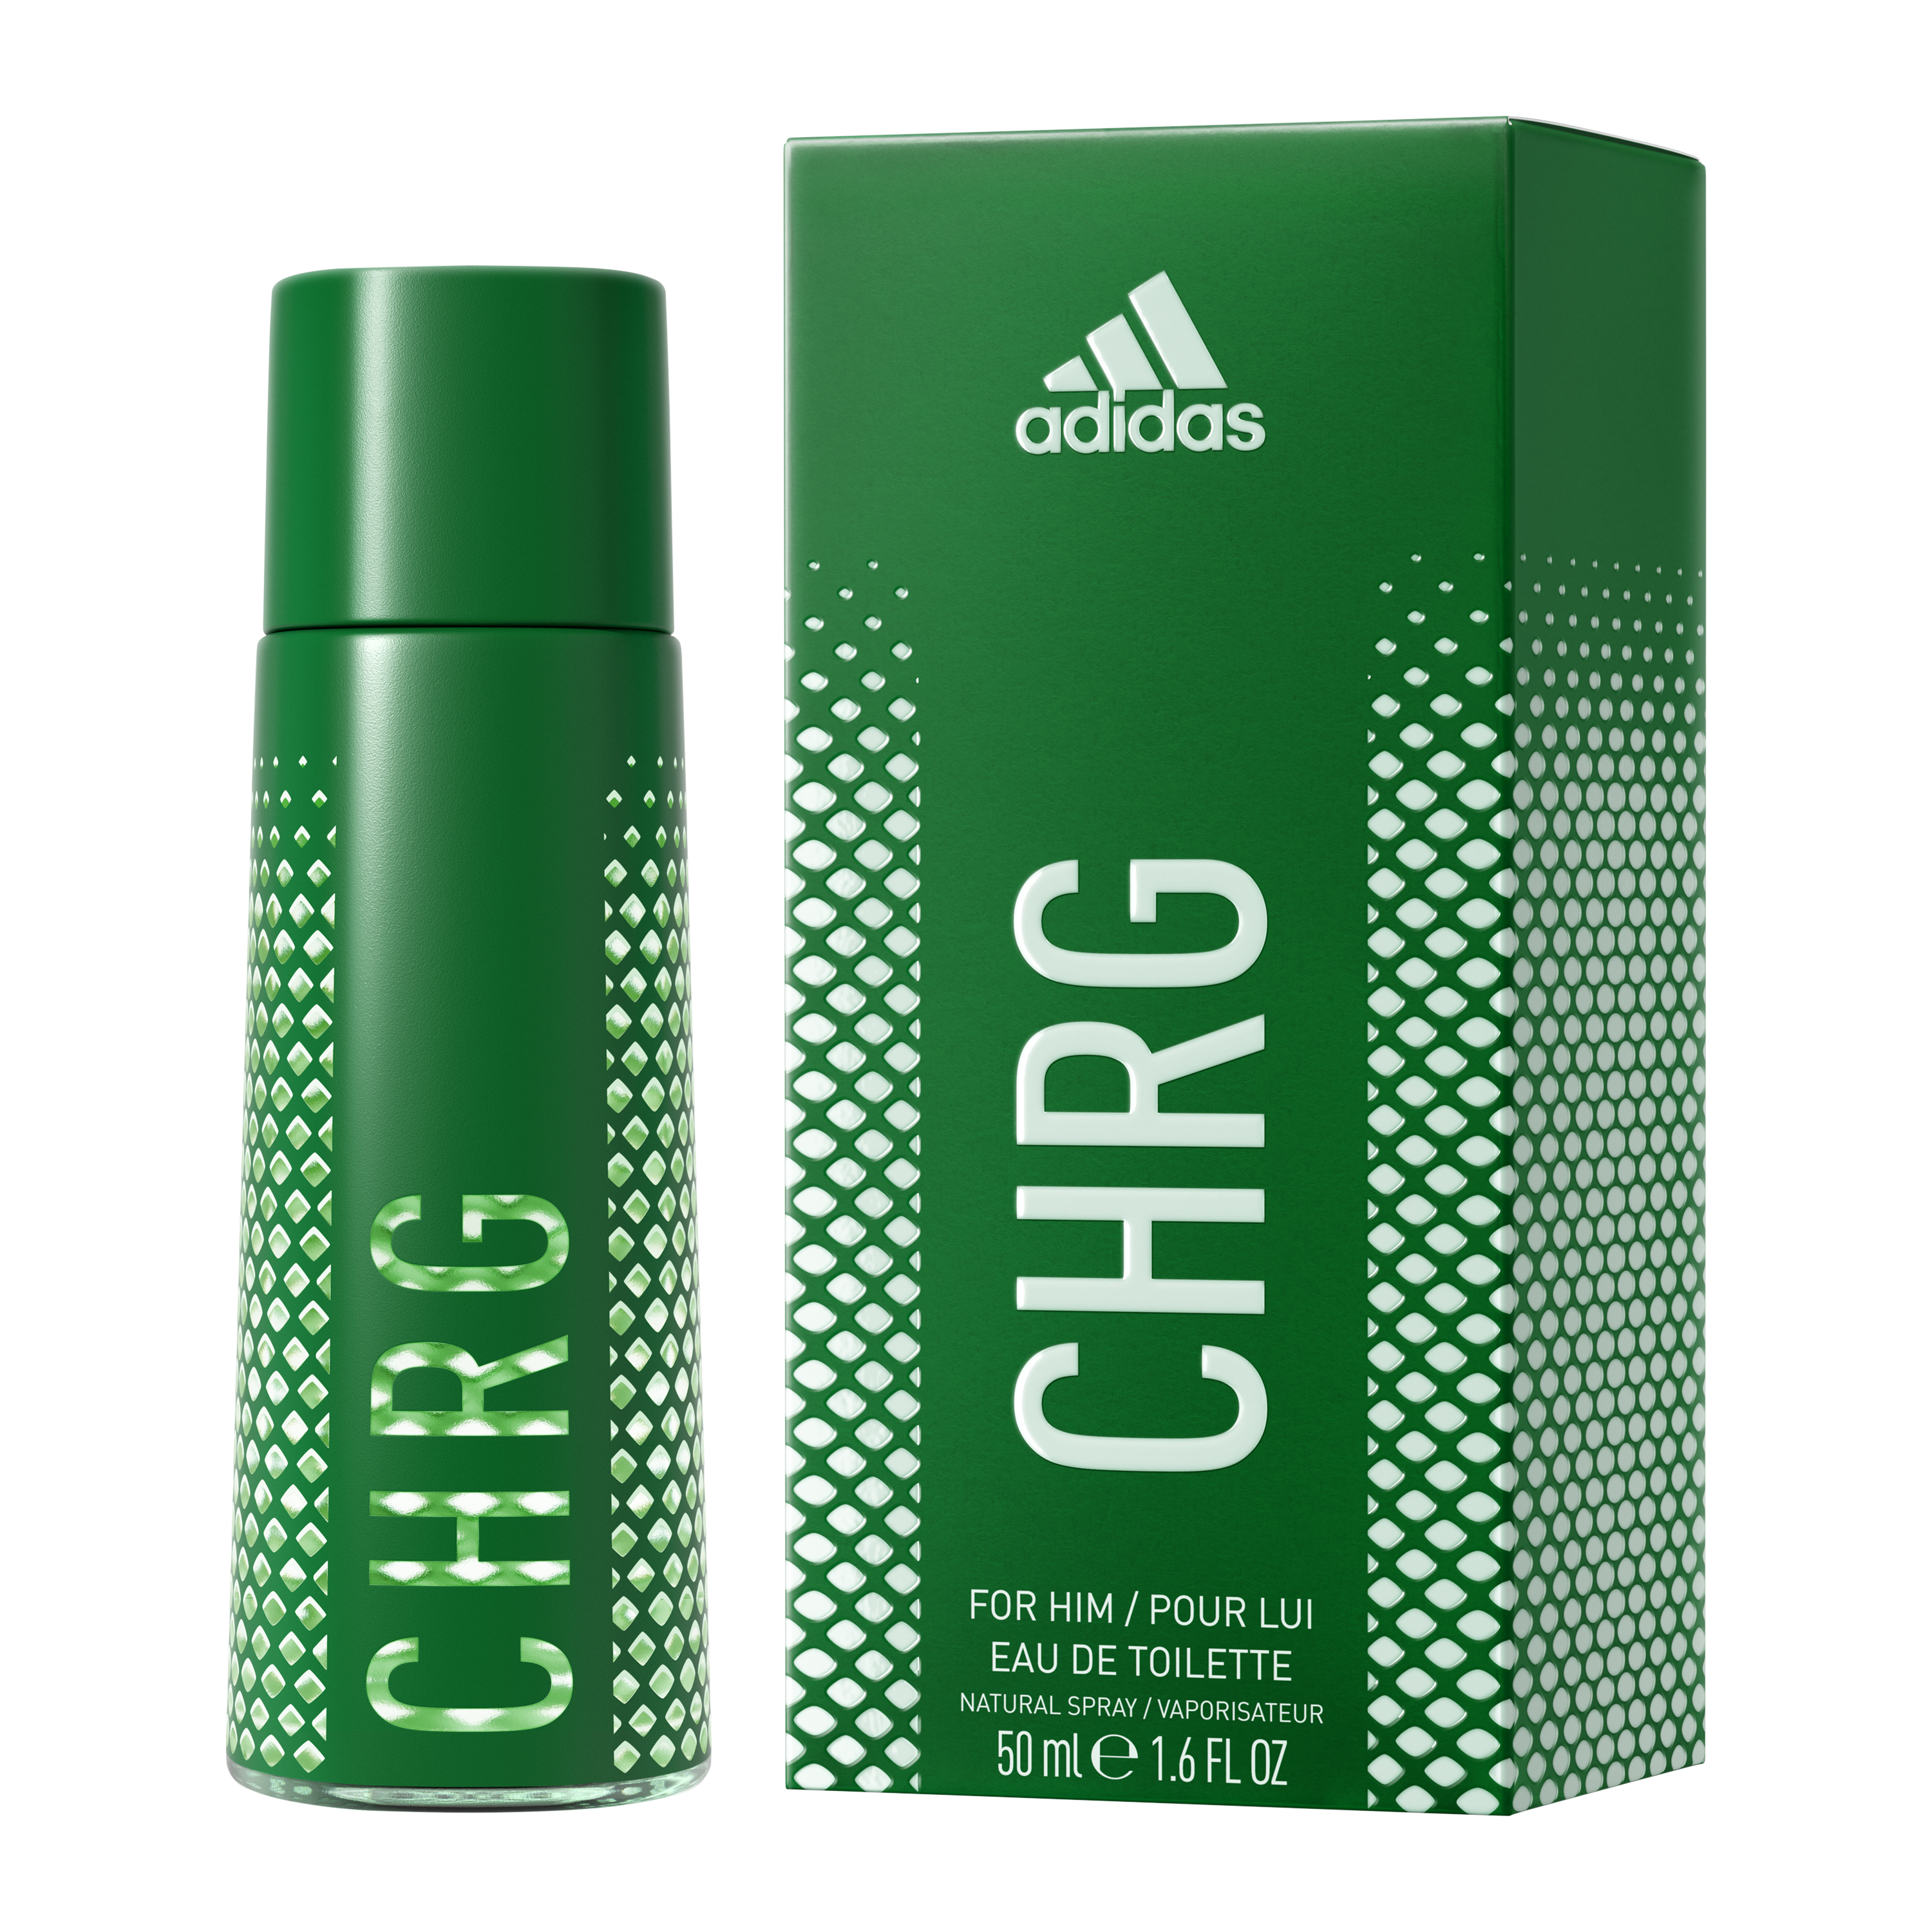 Culture of Sport Charge, 50 ml Adidas Miesten hajuvedet